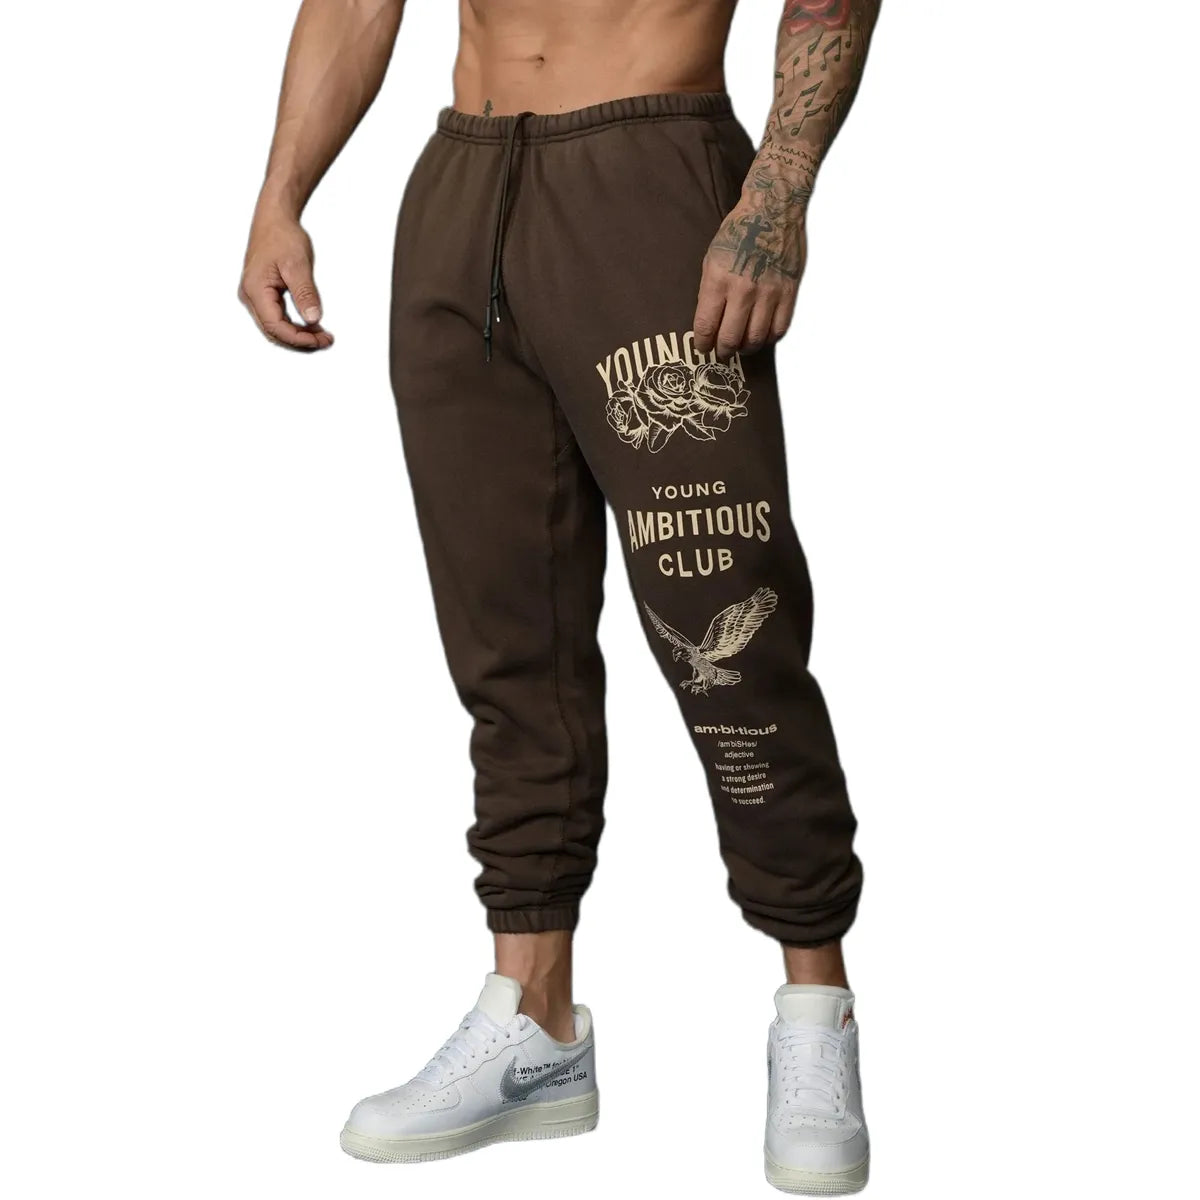 Autumn Jogger Pants Men Running Sweatpants Gym Fitness Training Trousers Male Casual Fashion Print Sportswear Bottoms Trackpants